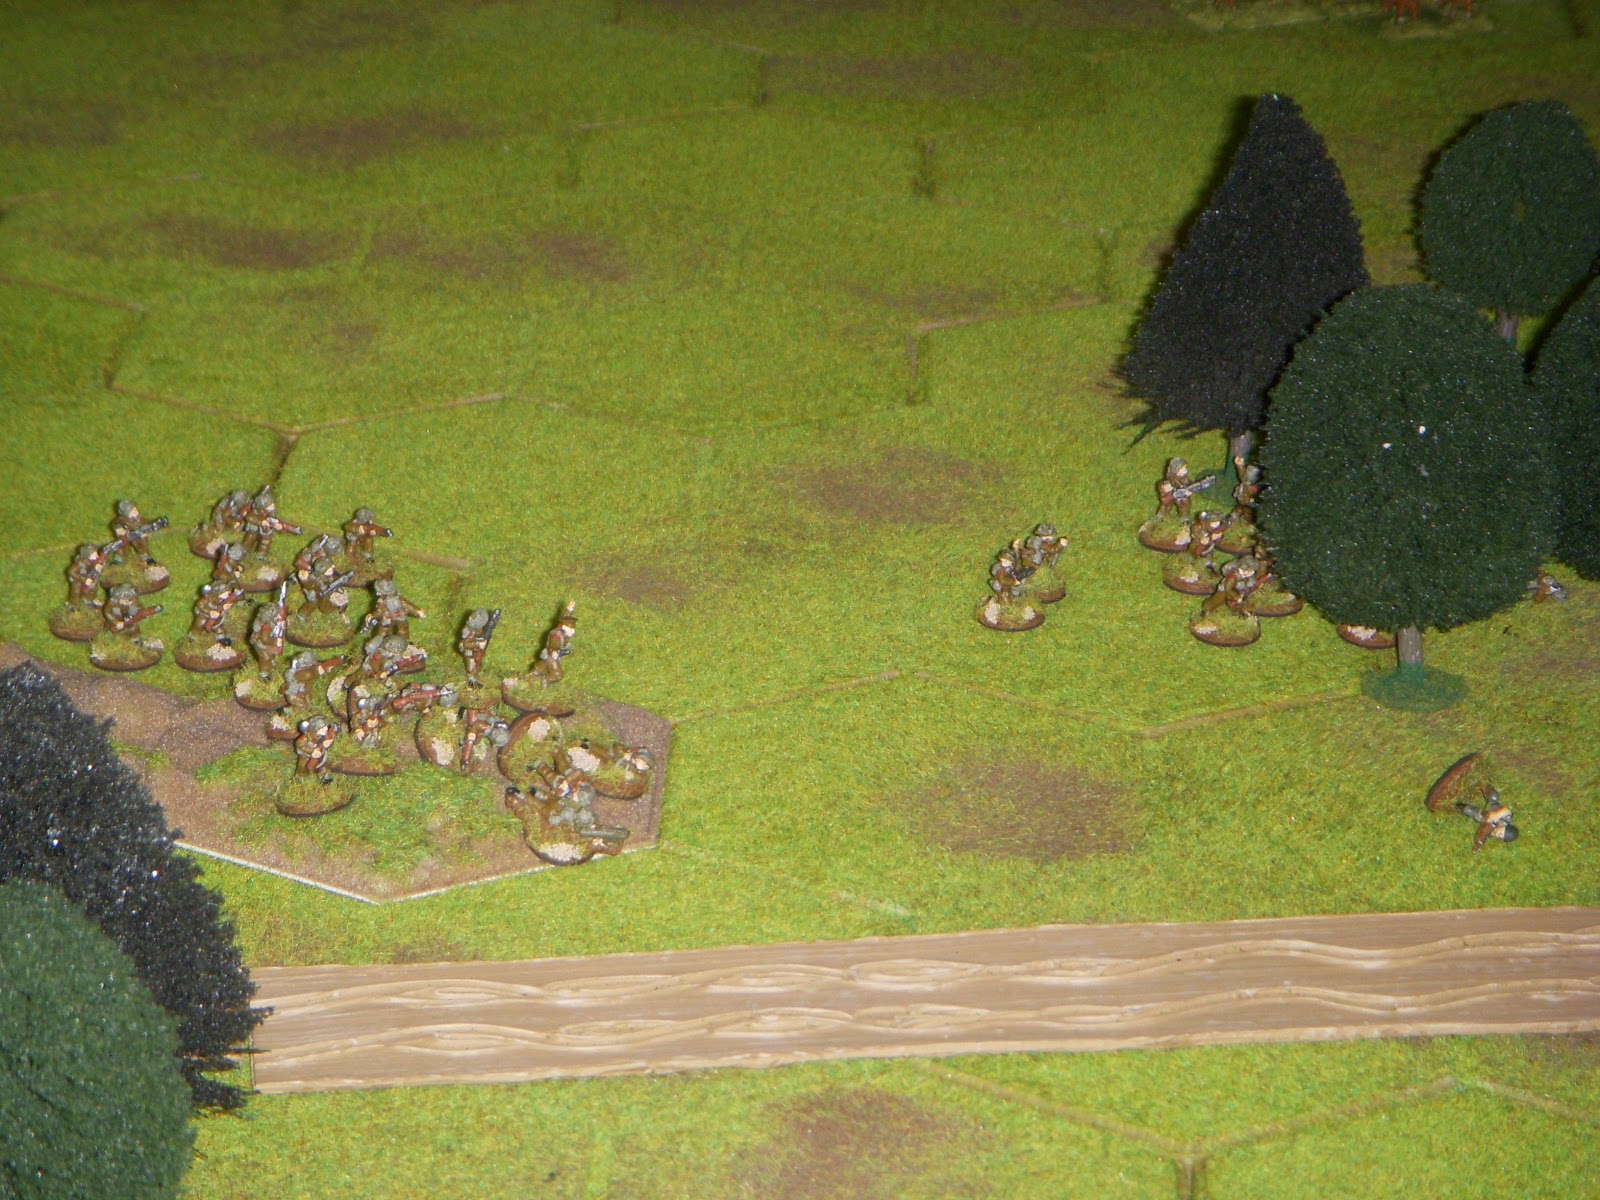  Meanwhile, 2nd Platoon has advanced on the left flank and entered the woods after flushing out the lone German squad 